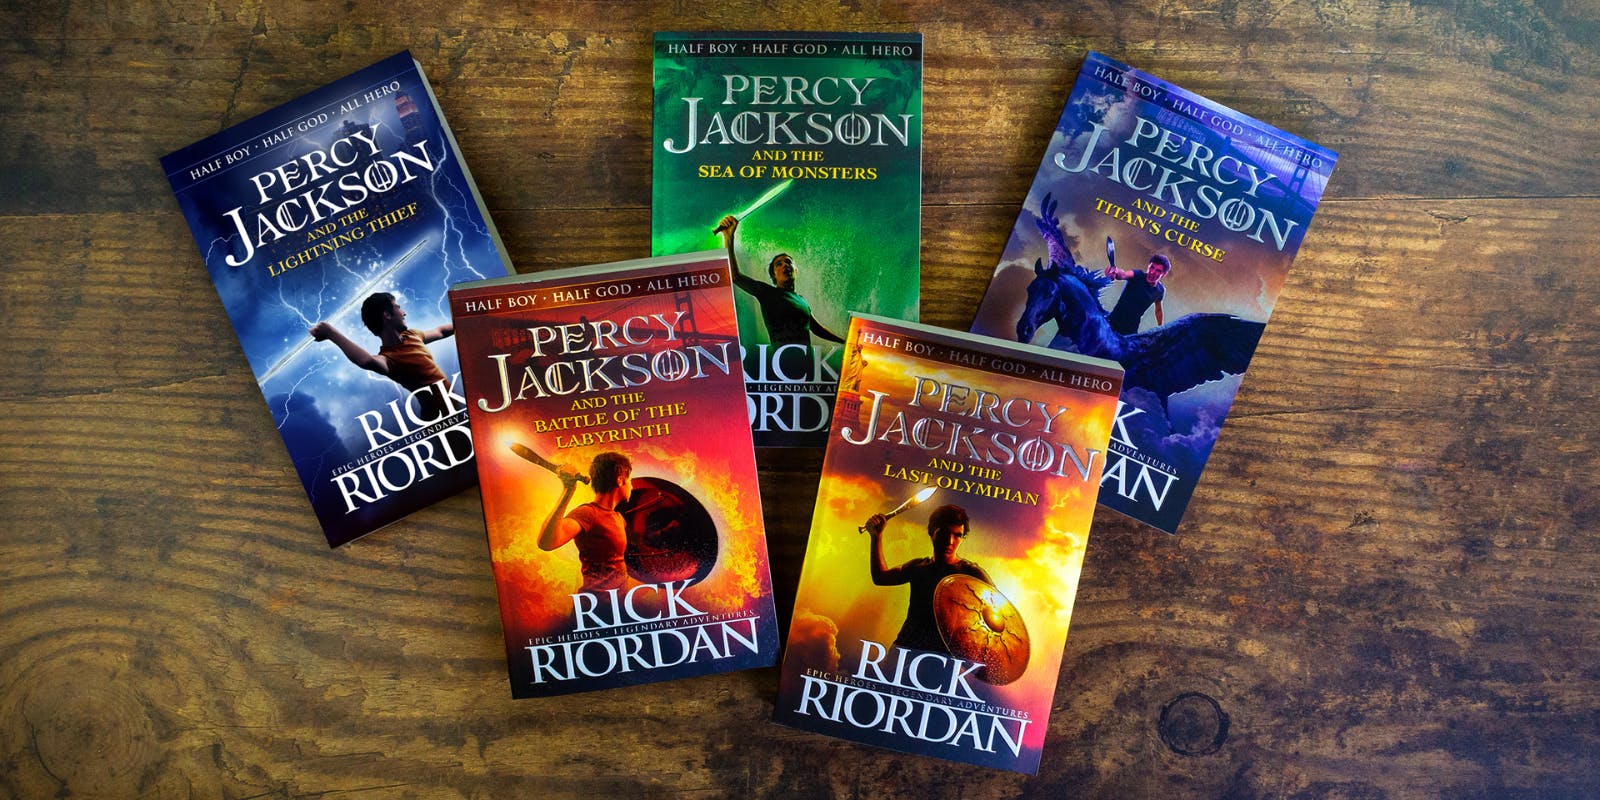 A deep-dive into the 3 Percy Jackson series and their books